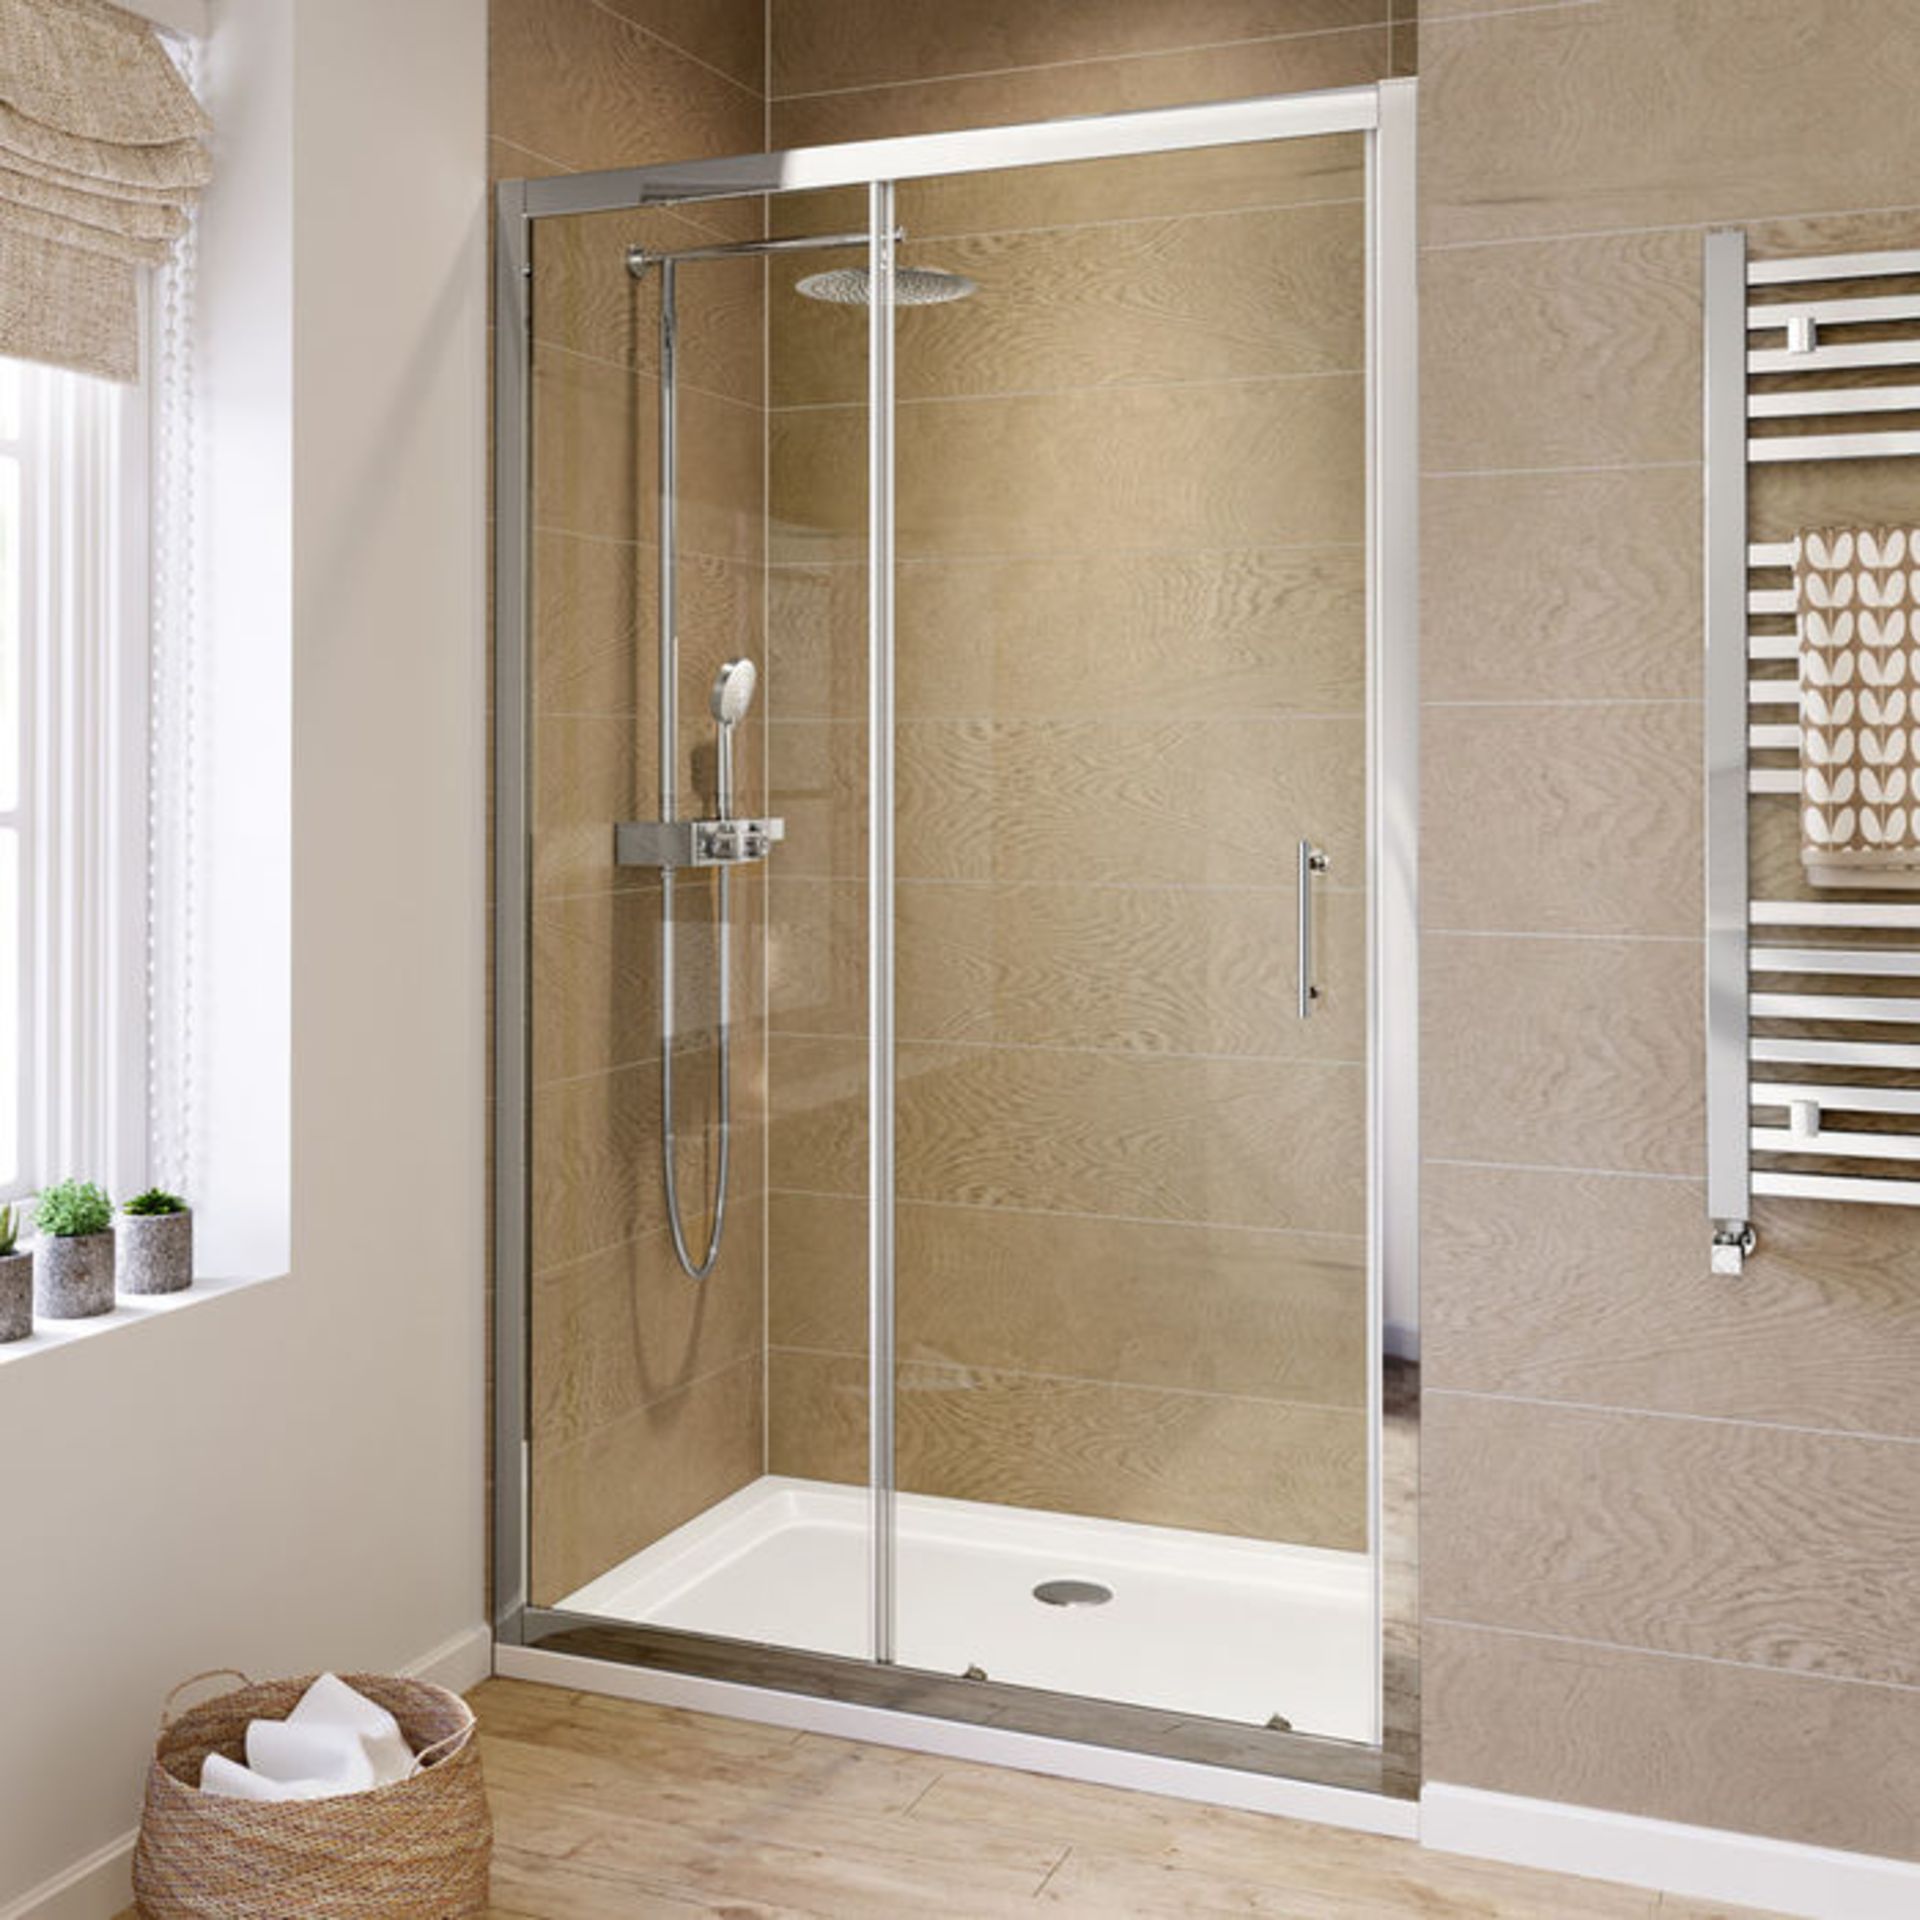 (T97) 1200mm - 6mm - Elements Sliding Shower Door. RRP £299.99.6mm Safety GlassFully waterproof - Image 2 of 2